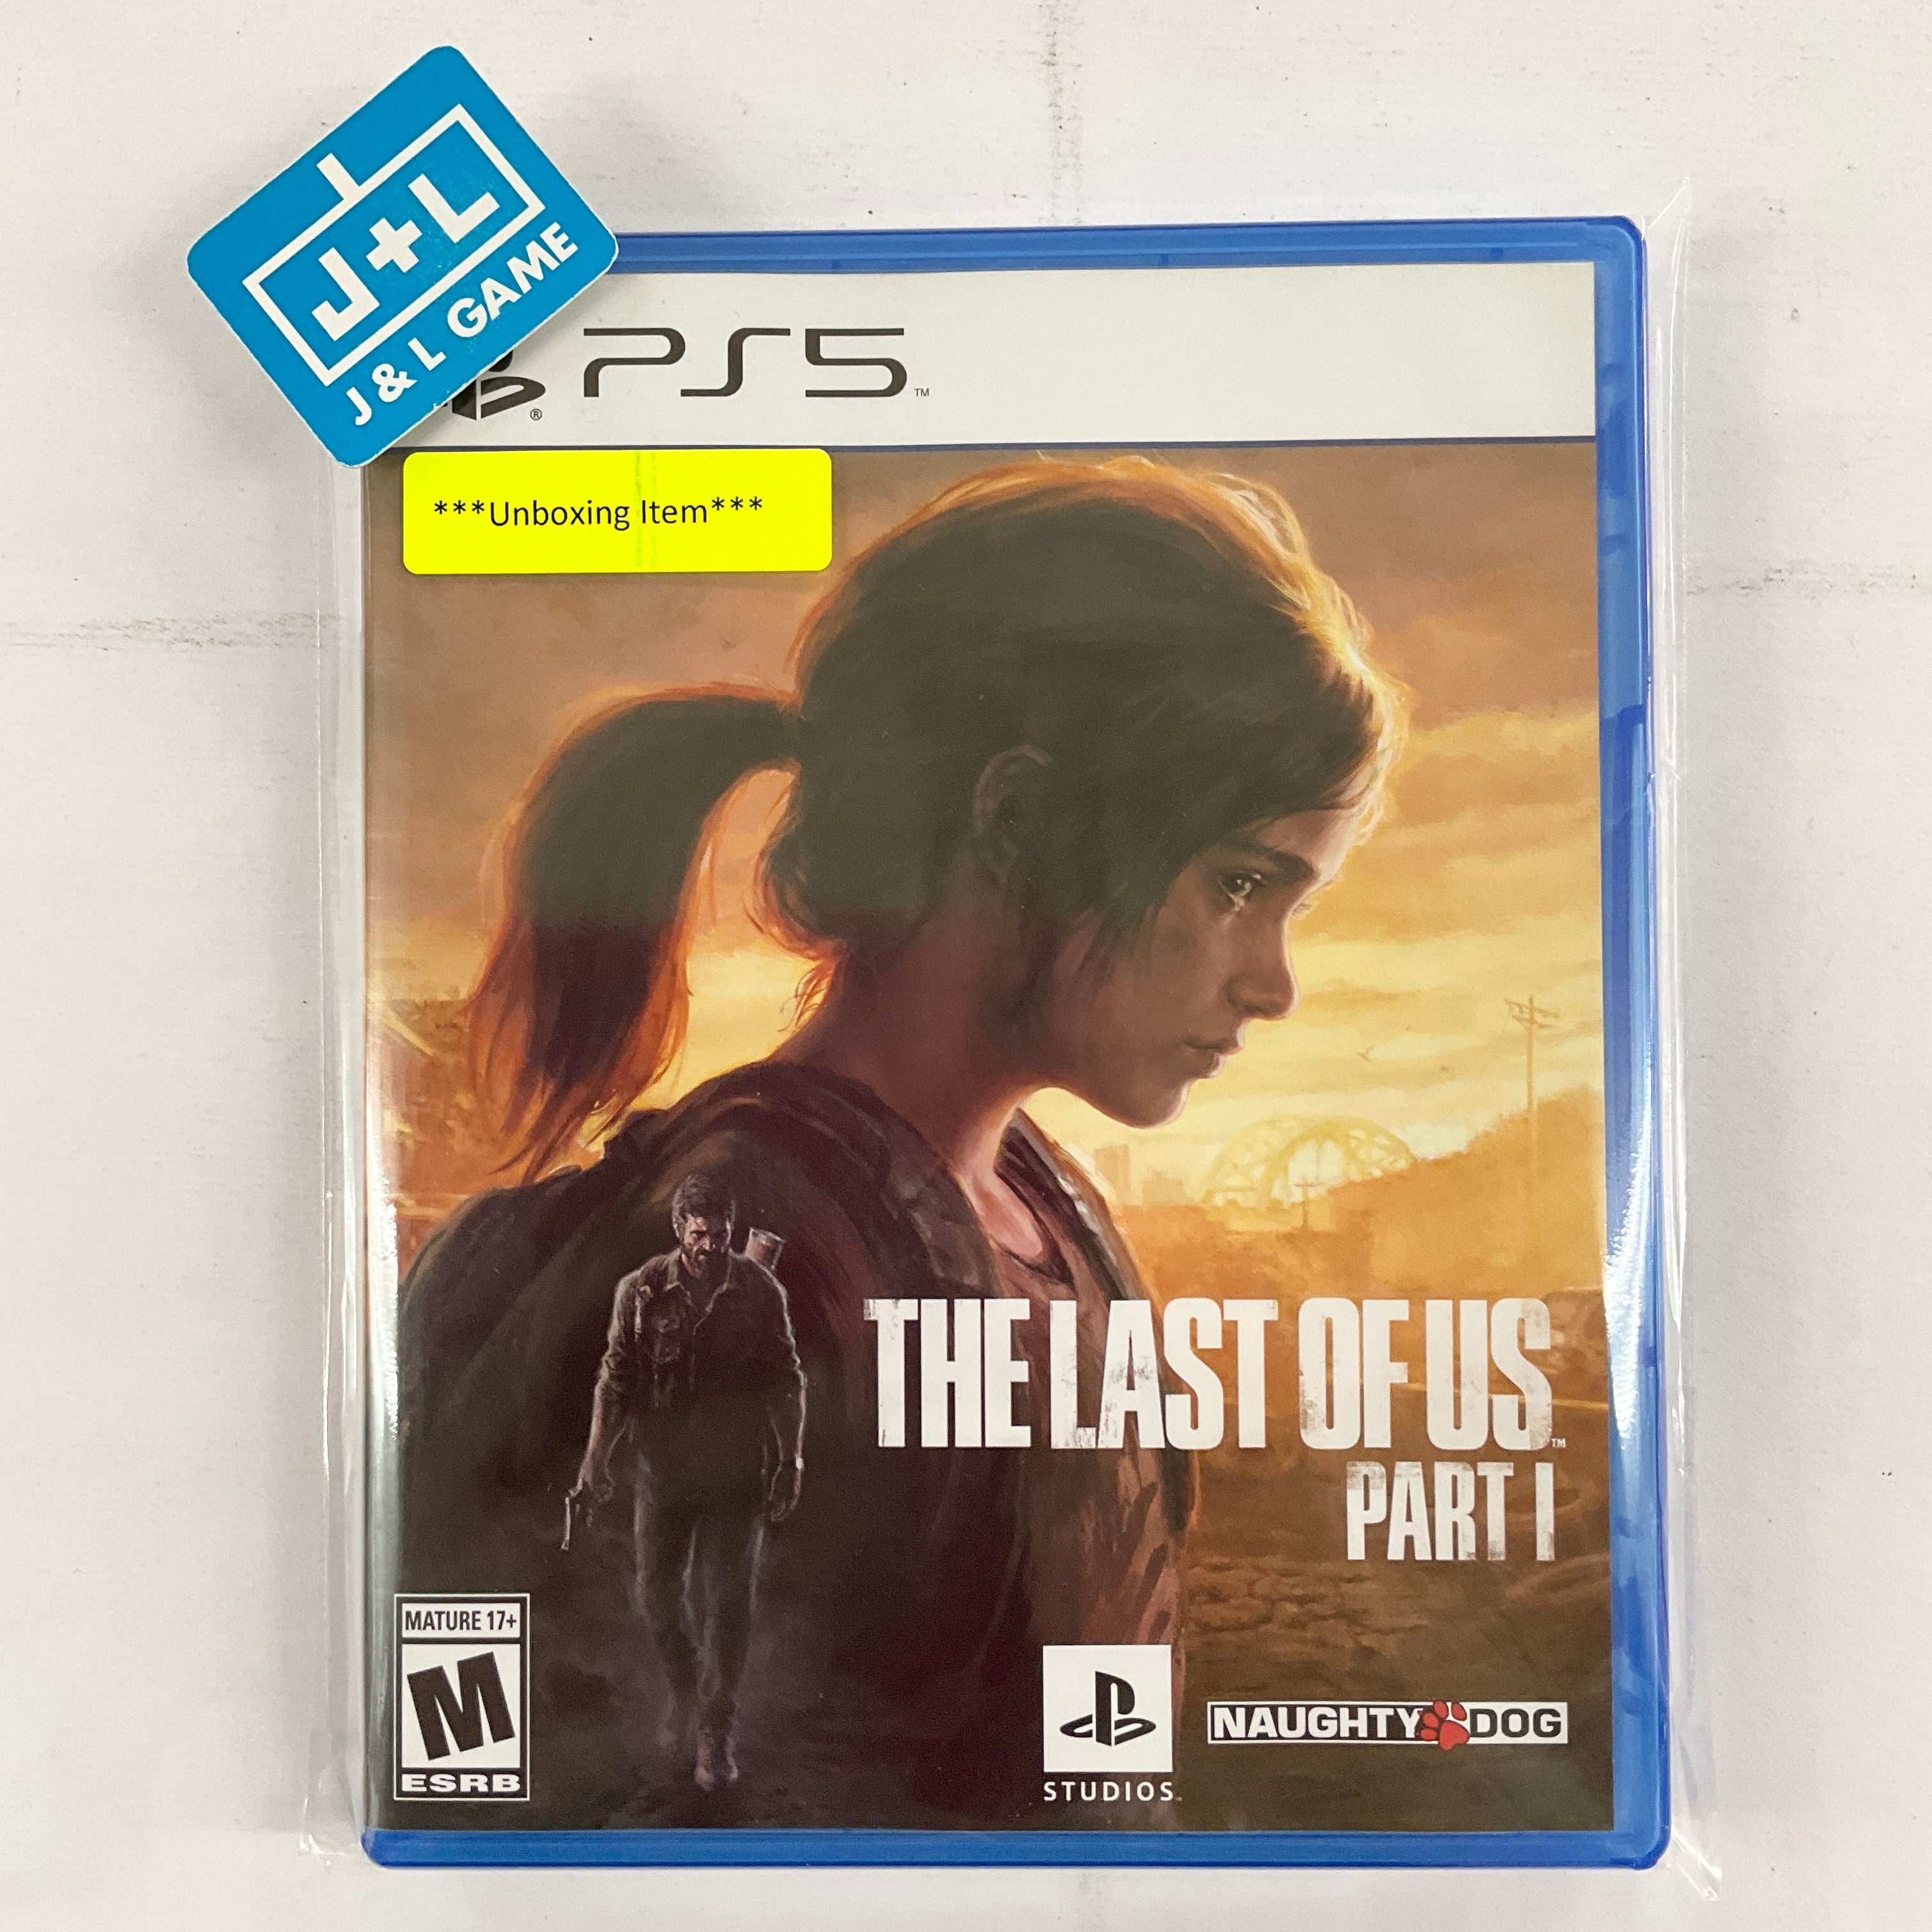 The Last of Us Part I – (PS5) PlayStation 5 [UNBOXING] Video Games PlayStation   